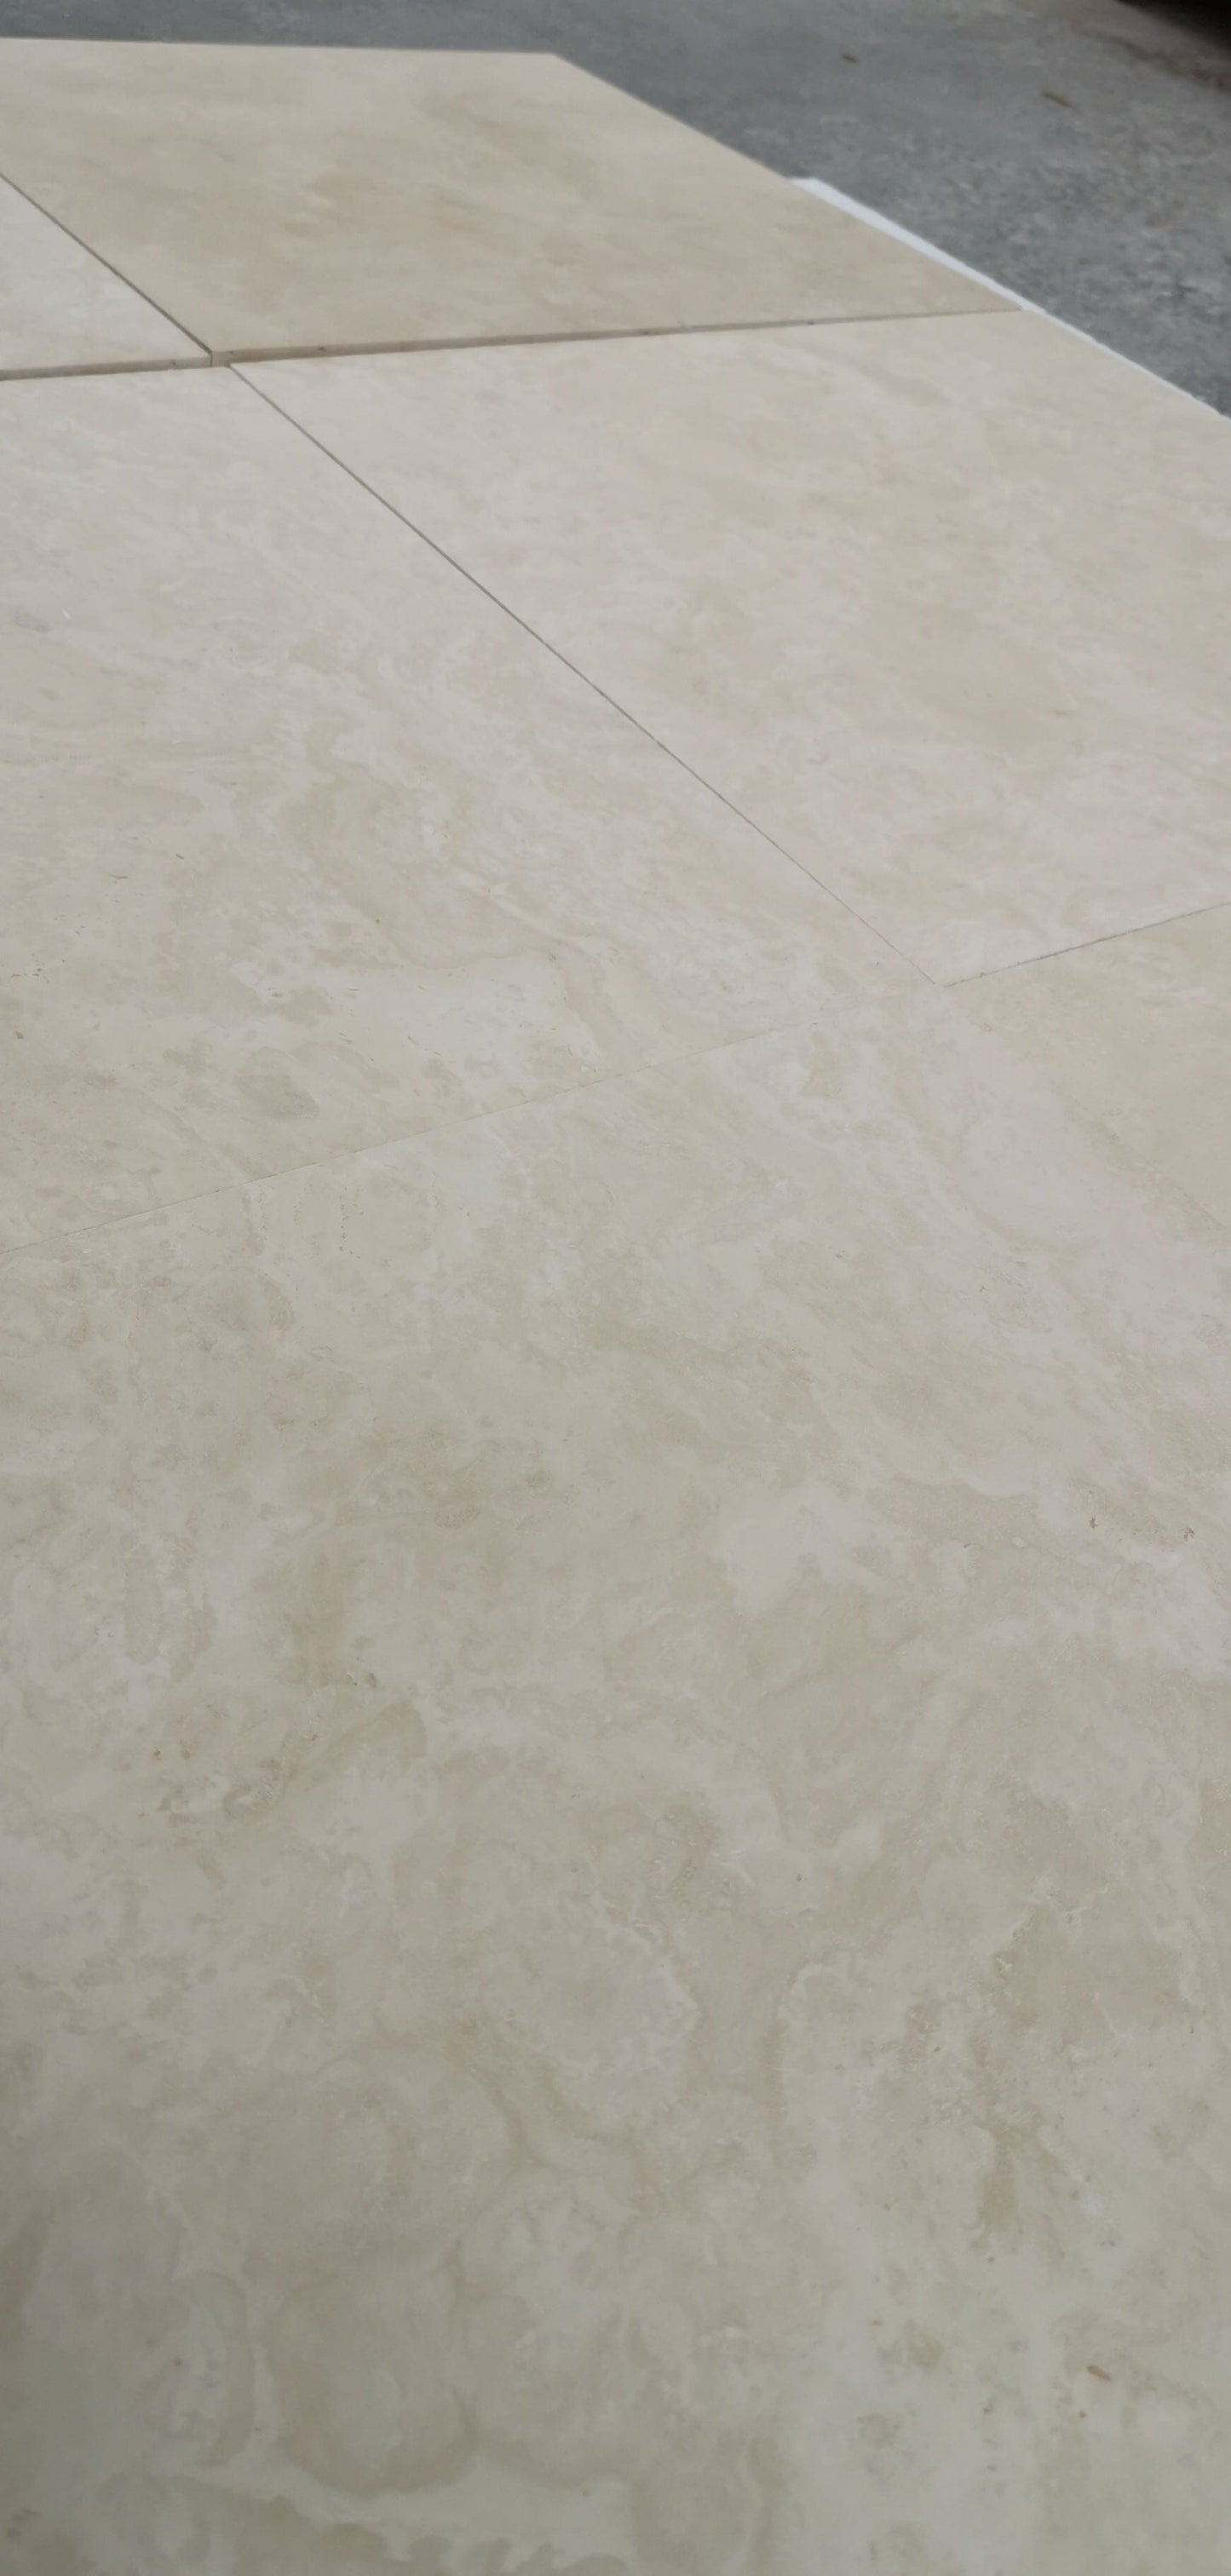 Ivory Travertine Filled & Honed Wall and Floor Premium Tile 12x12"